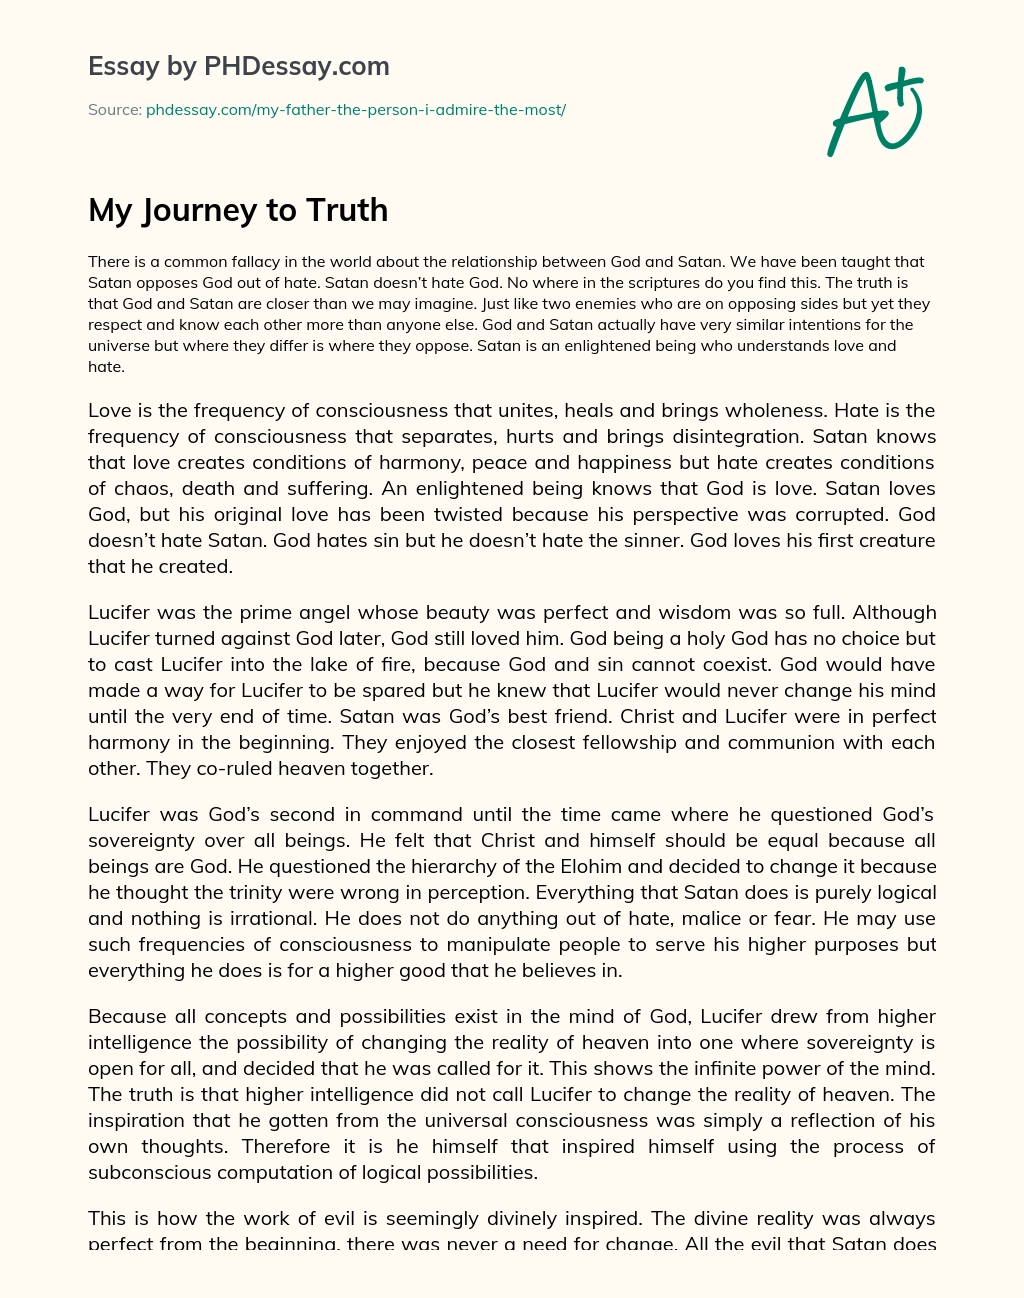 My Journey to Truth essay